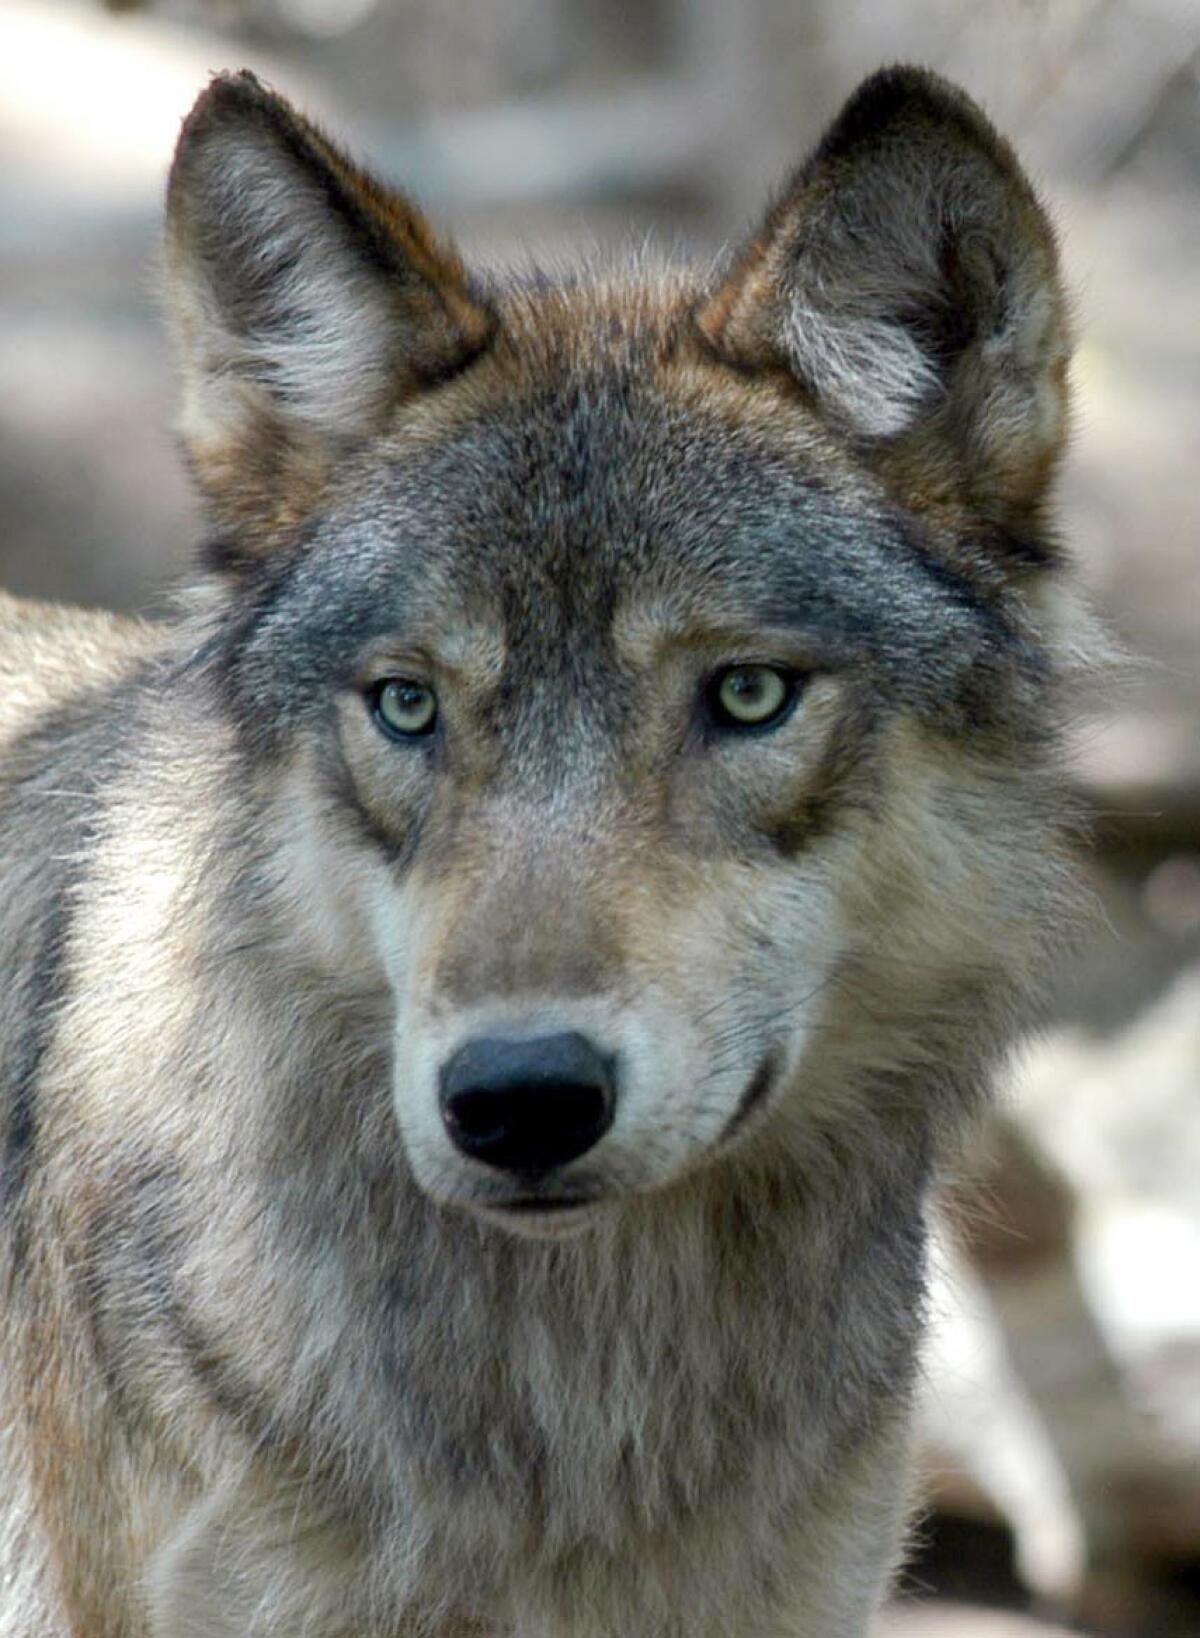 Wolves were once common and ranged across much of the continental United States.